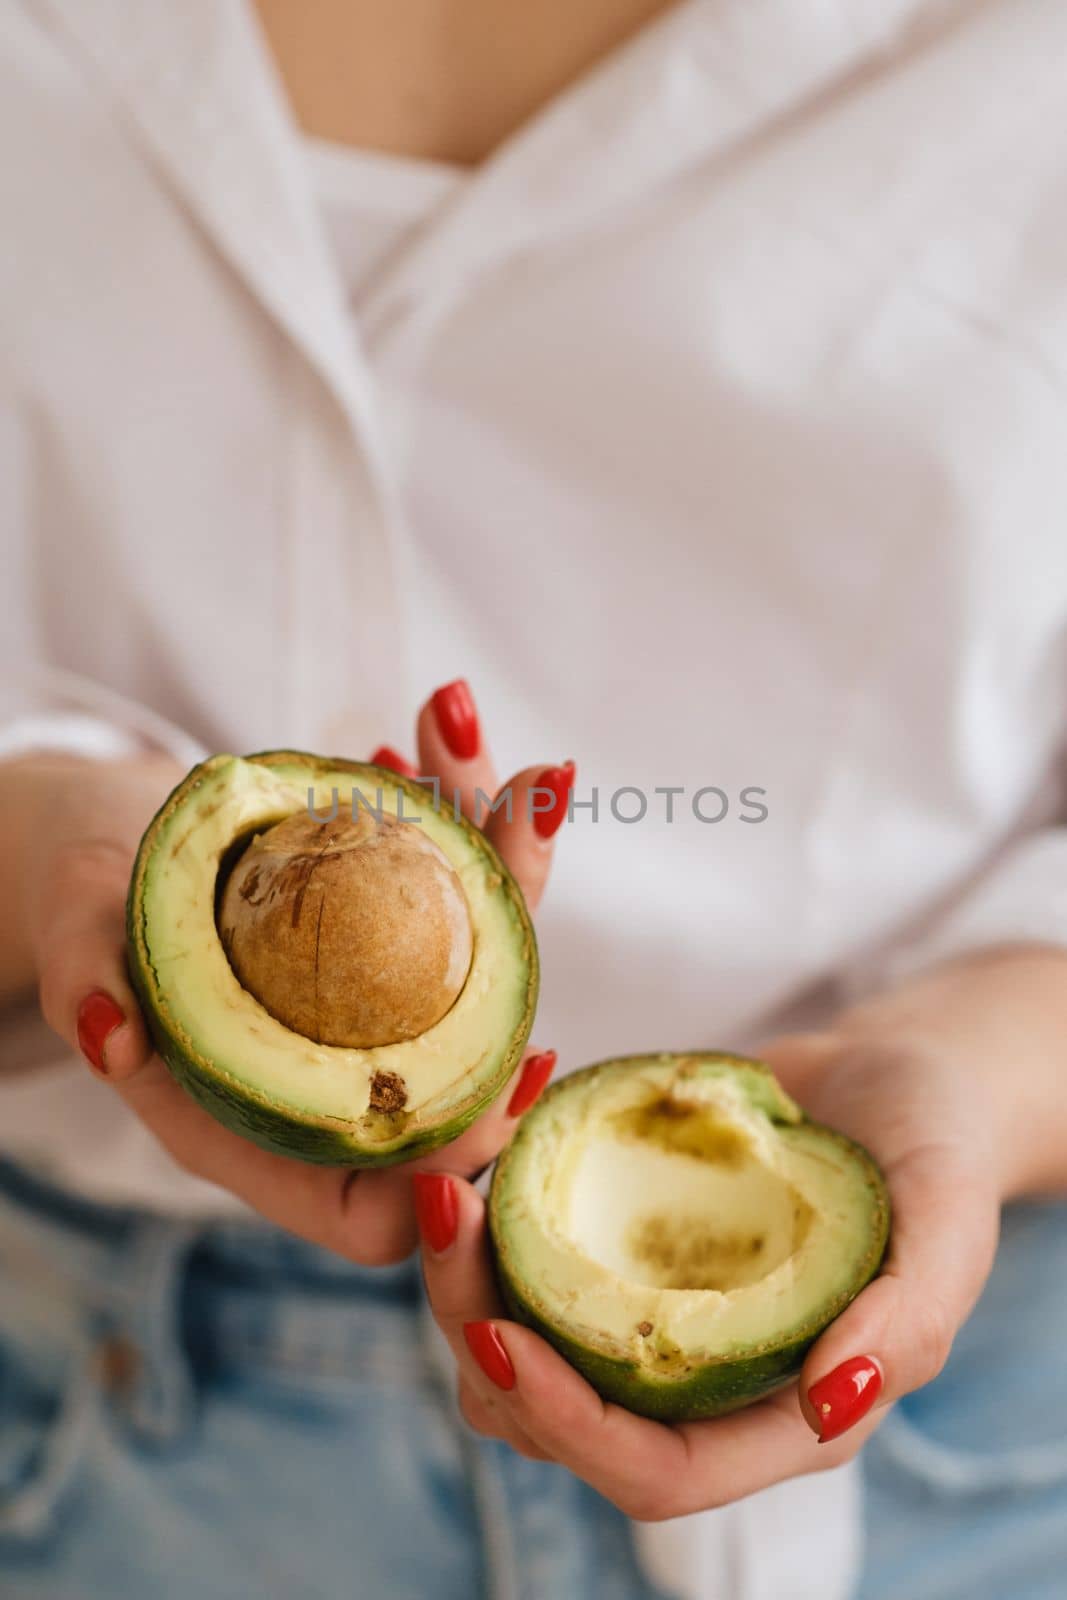 Close-up of a girl's hand holding an avocado cut in two.